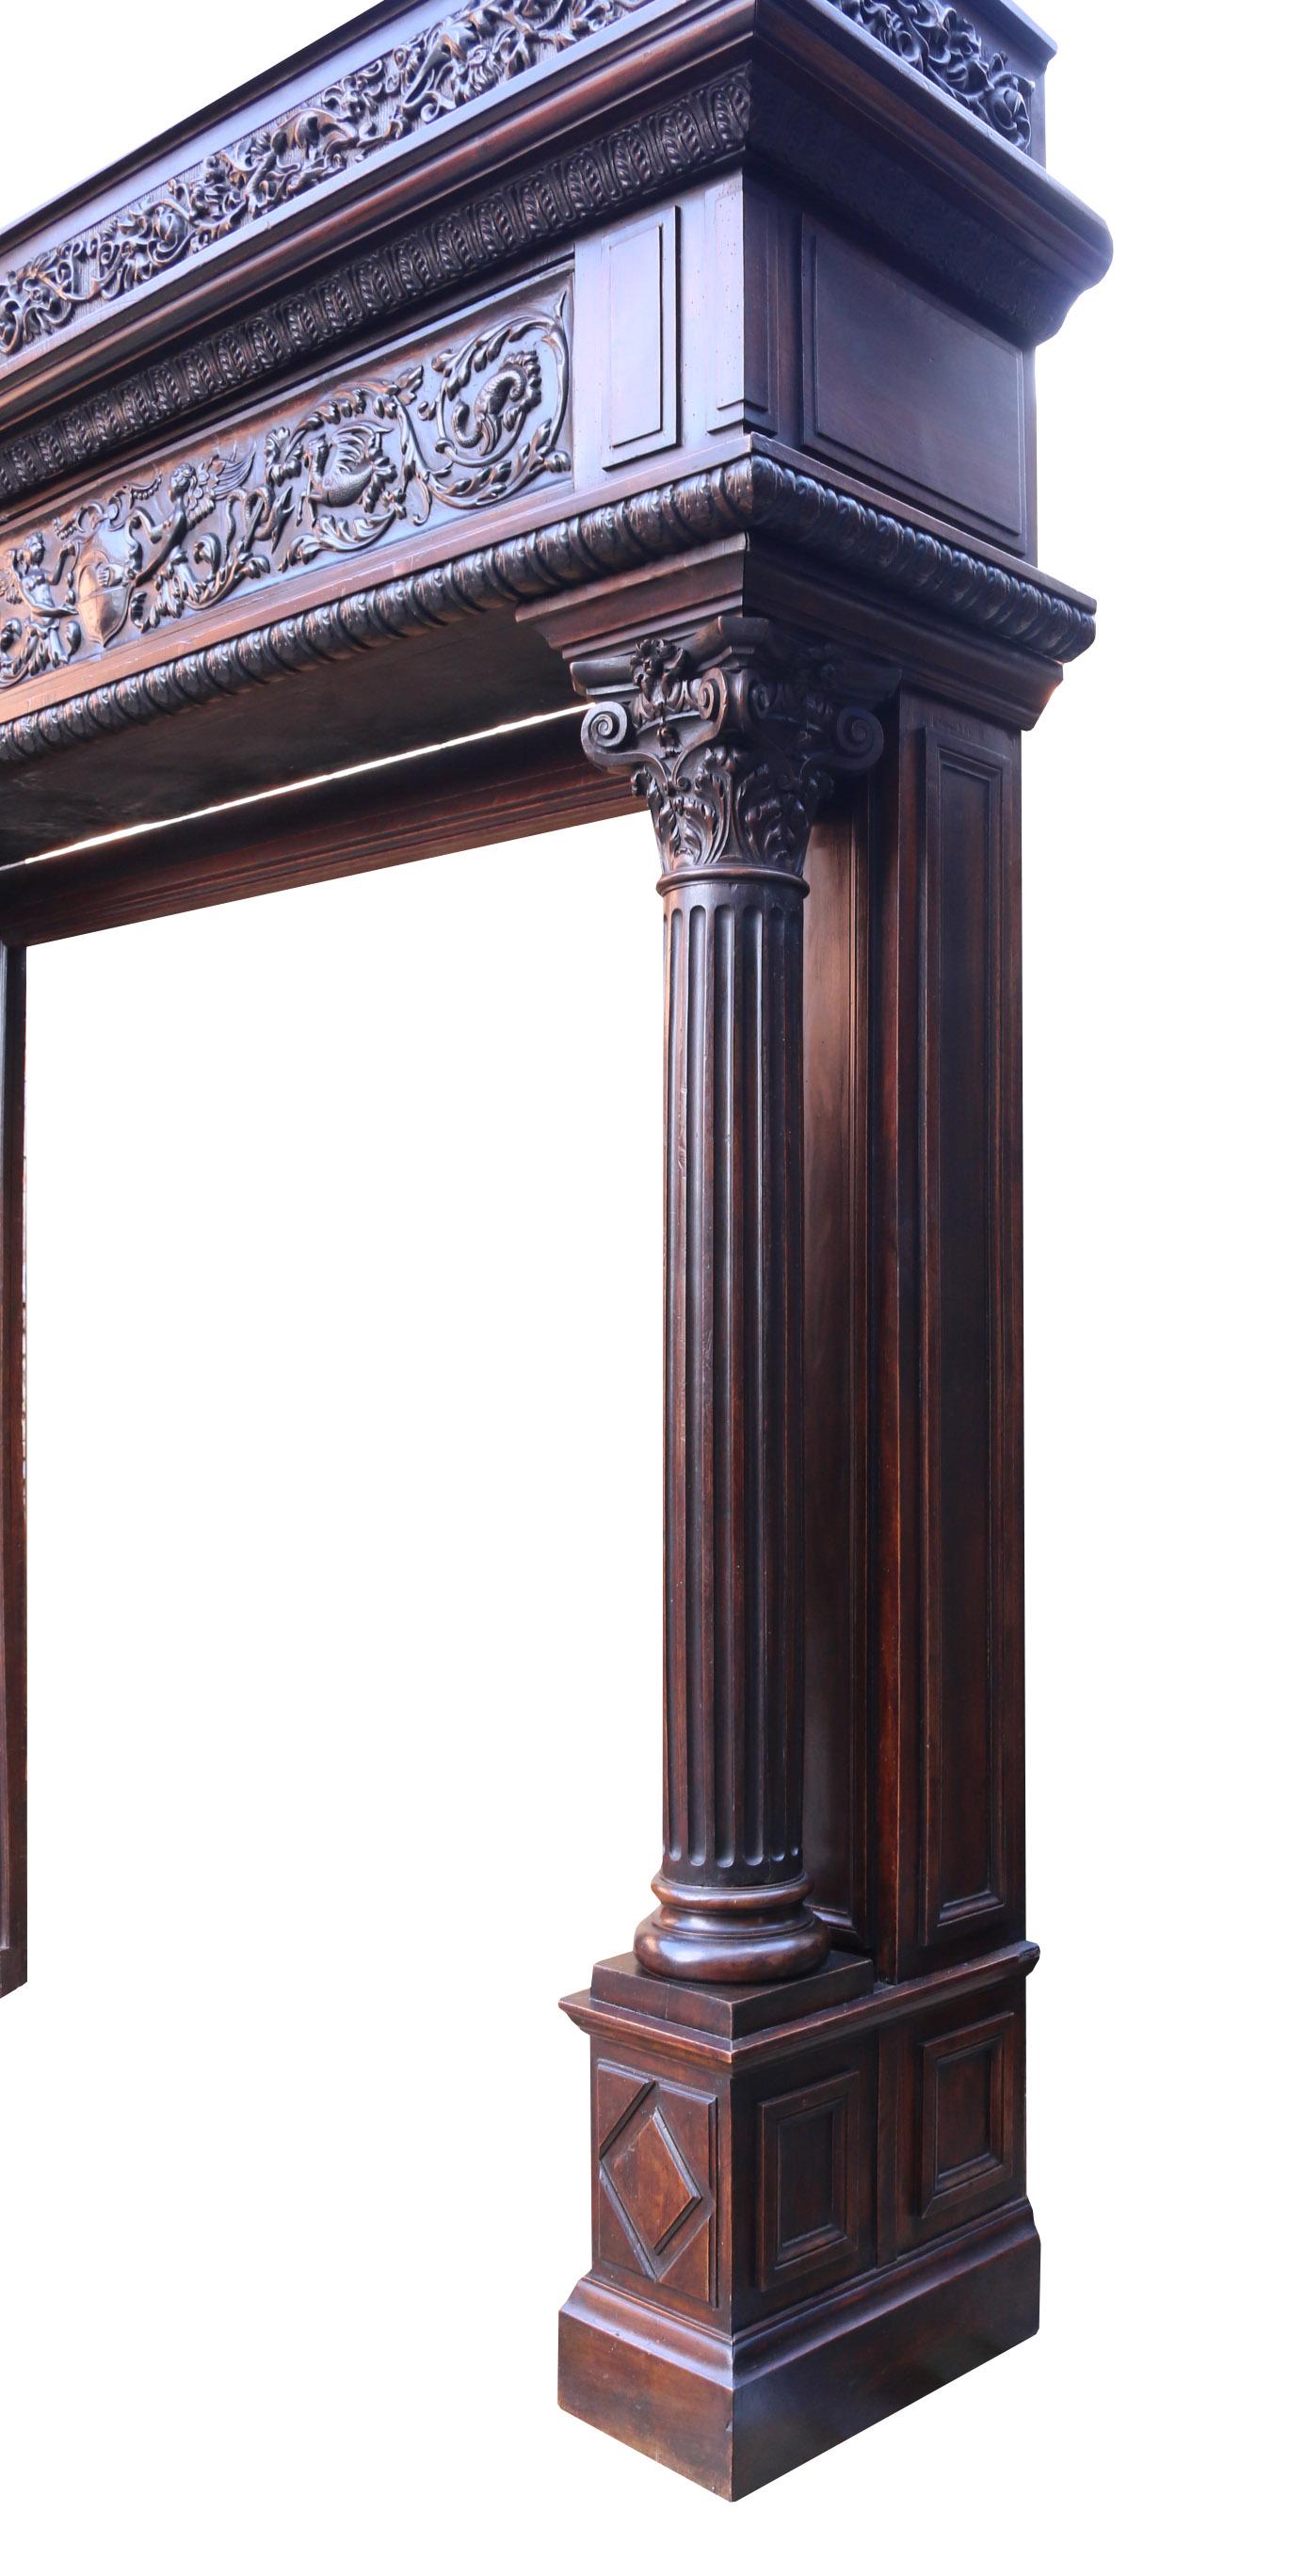 Antique Carved Walnut Renaissance Style Fire Mantel In Good Condition For Sale In Wormelow, Herefordshire